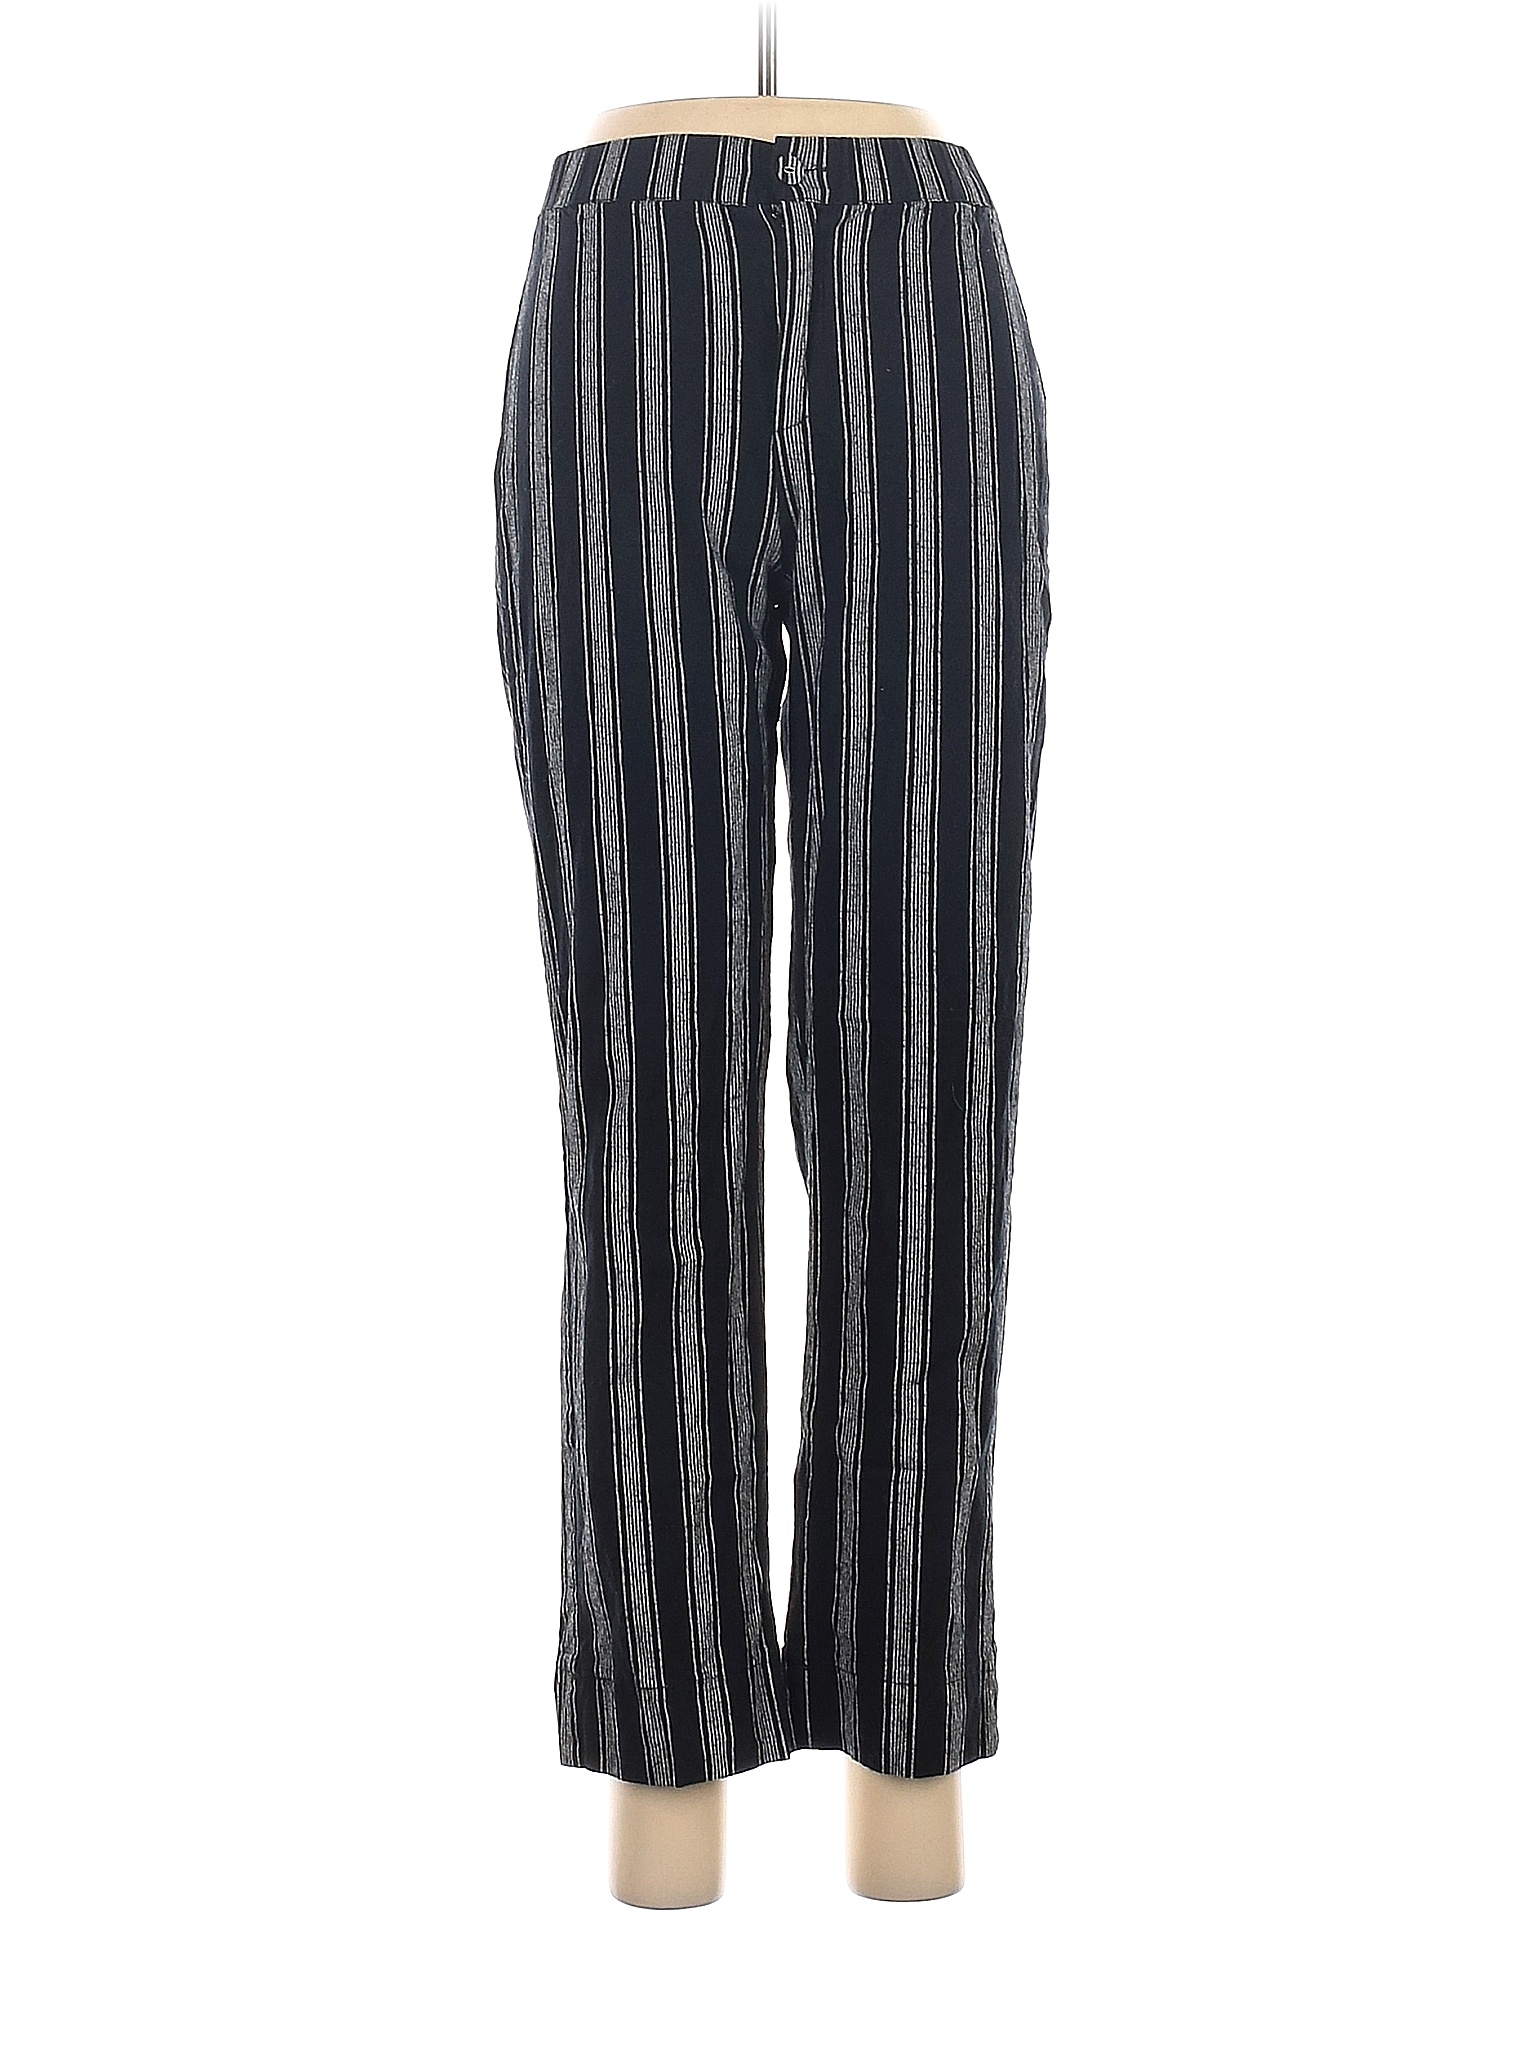 Brandy Melville Stripes Black Blue Casual Pants One Size - 47% off